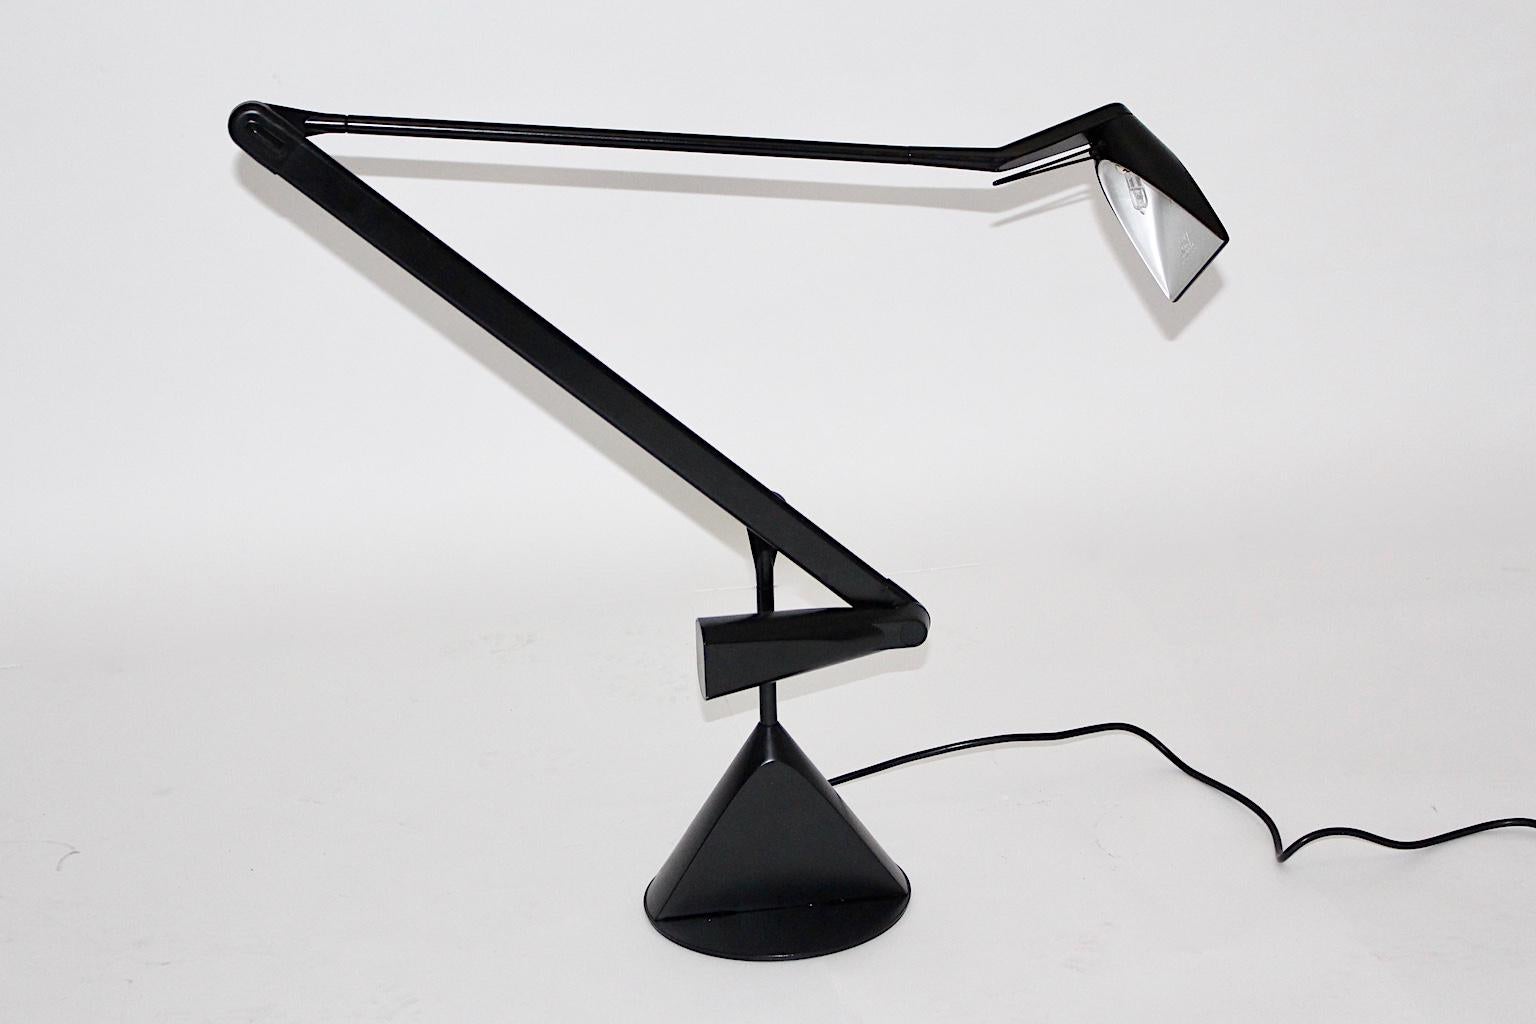 Modern vintage table lamp or desk lamp or architect lamp designed by Walter A. Monici for Lumina, Italy. Marked
A triangular shaped base with a folding and fold out arm points out the design features from the 1980s, when geometric forms are very